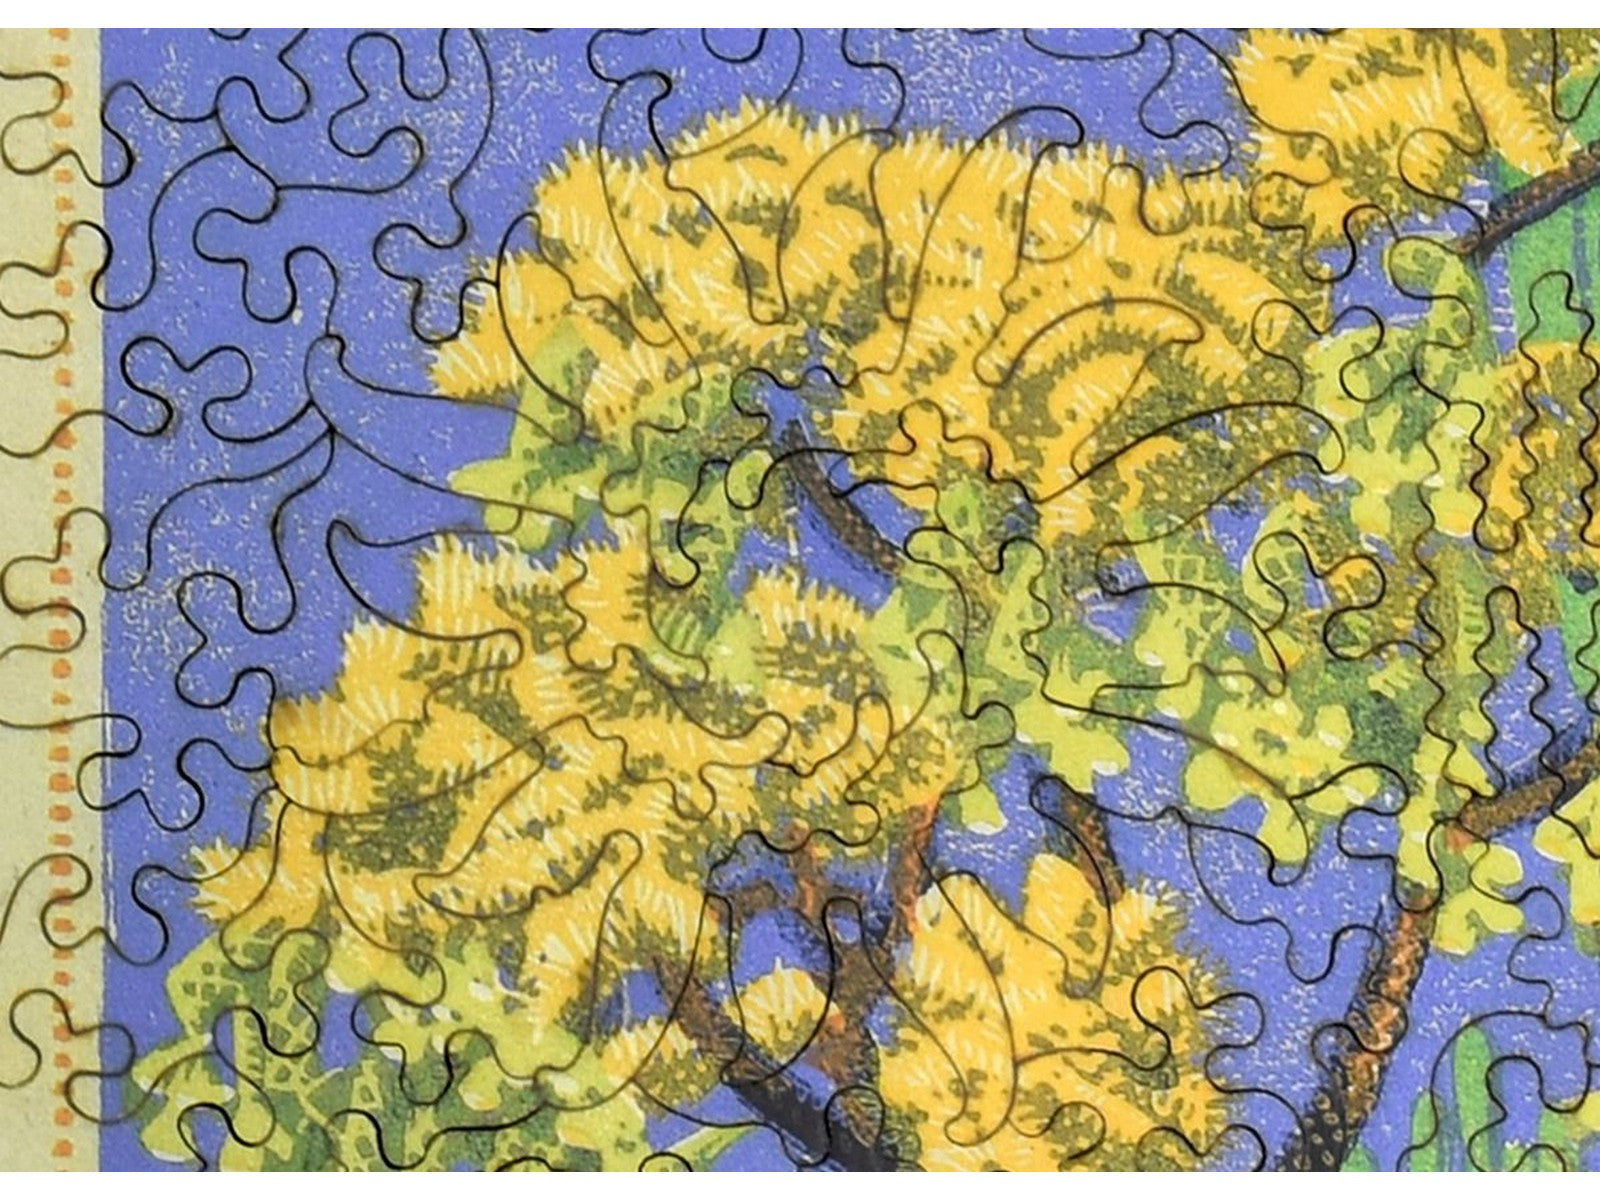 A closeup of the front of the puzzle, Cholla and Sahuaro, showing the detail in the pieces.